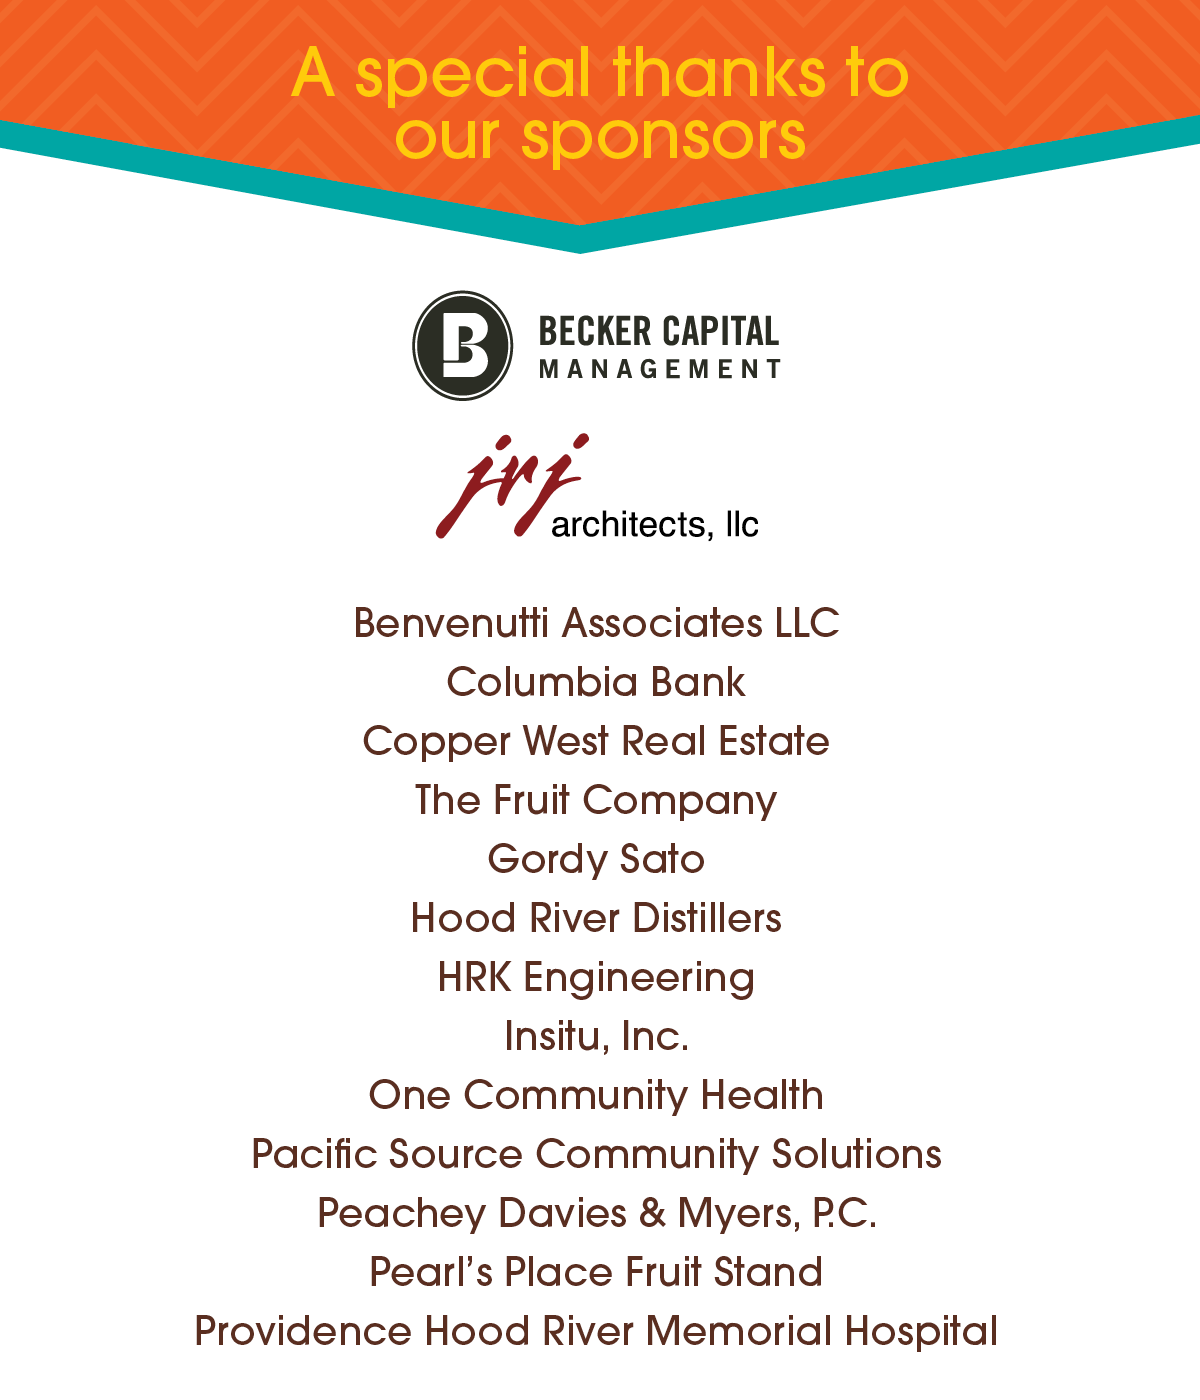 text list of sponsors for the event